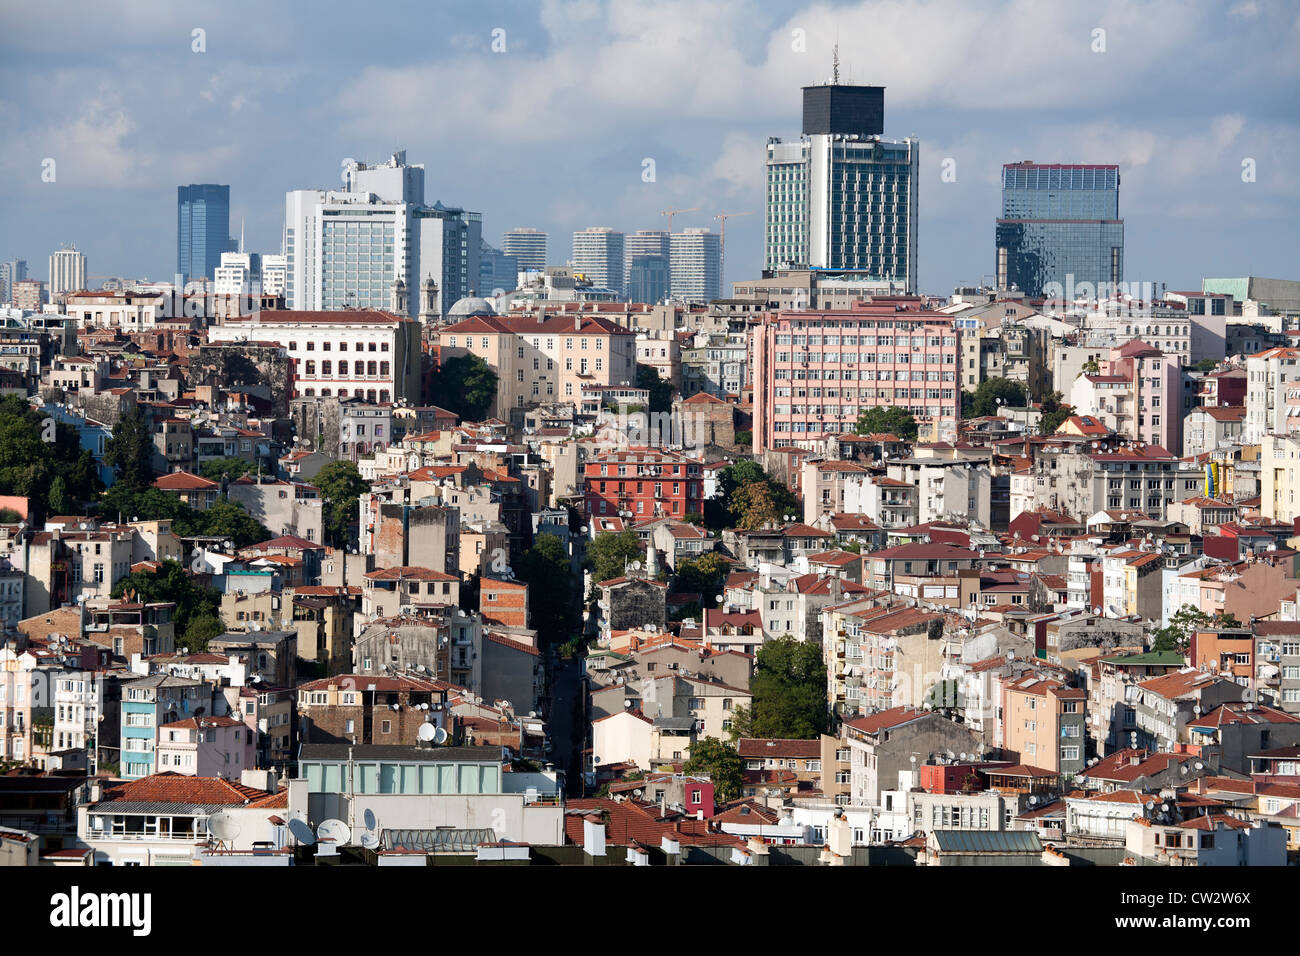 View of high rice buildings in Istanbul Turkey Stock Photo